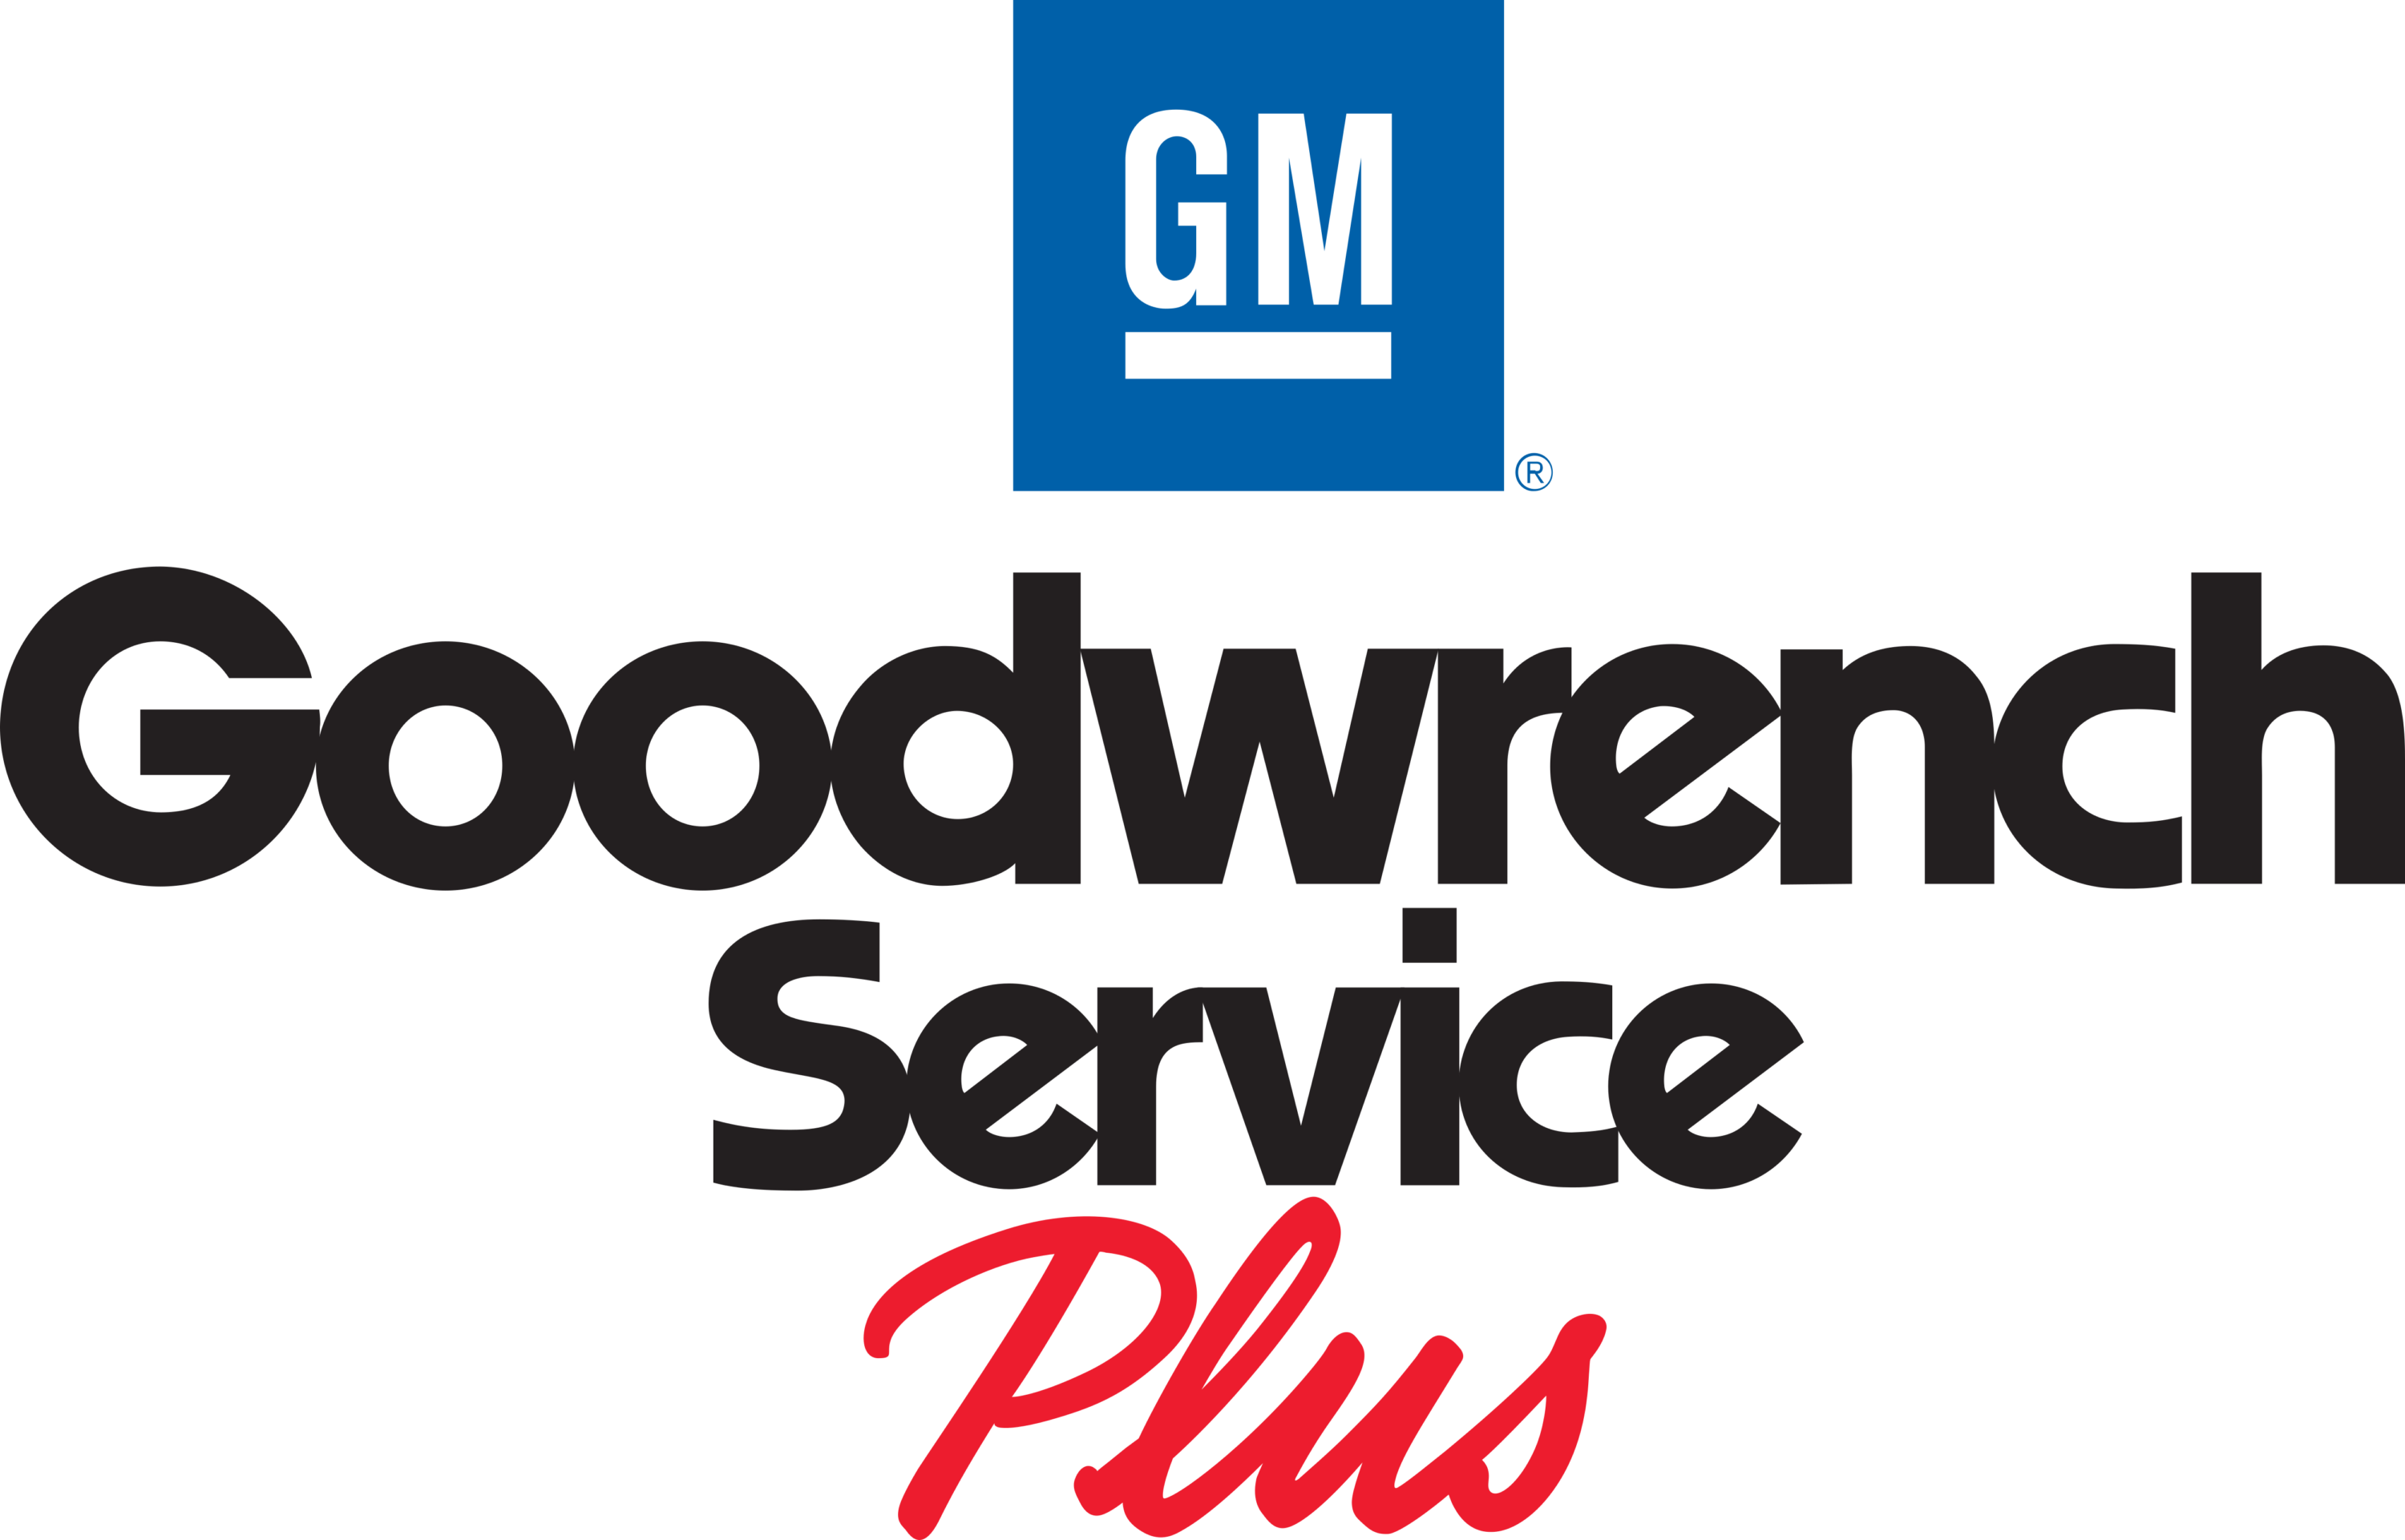 Goodwrench Service Logo